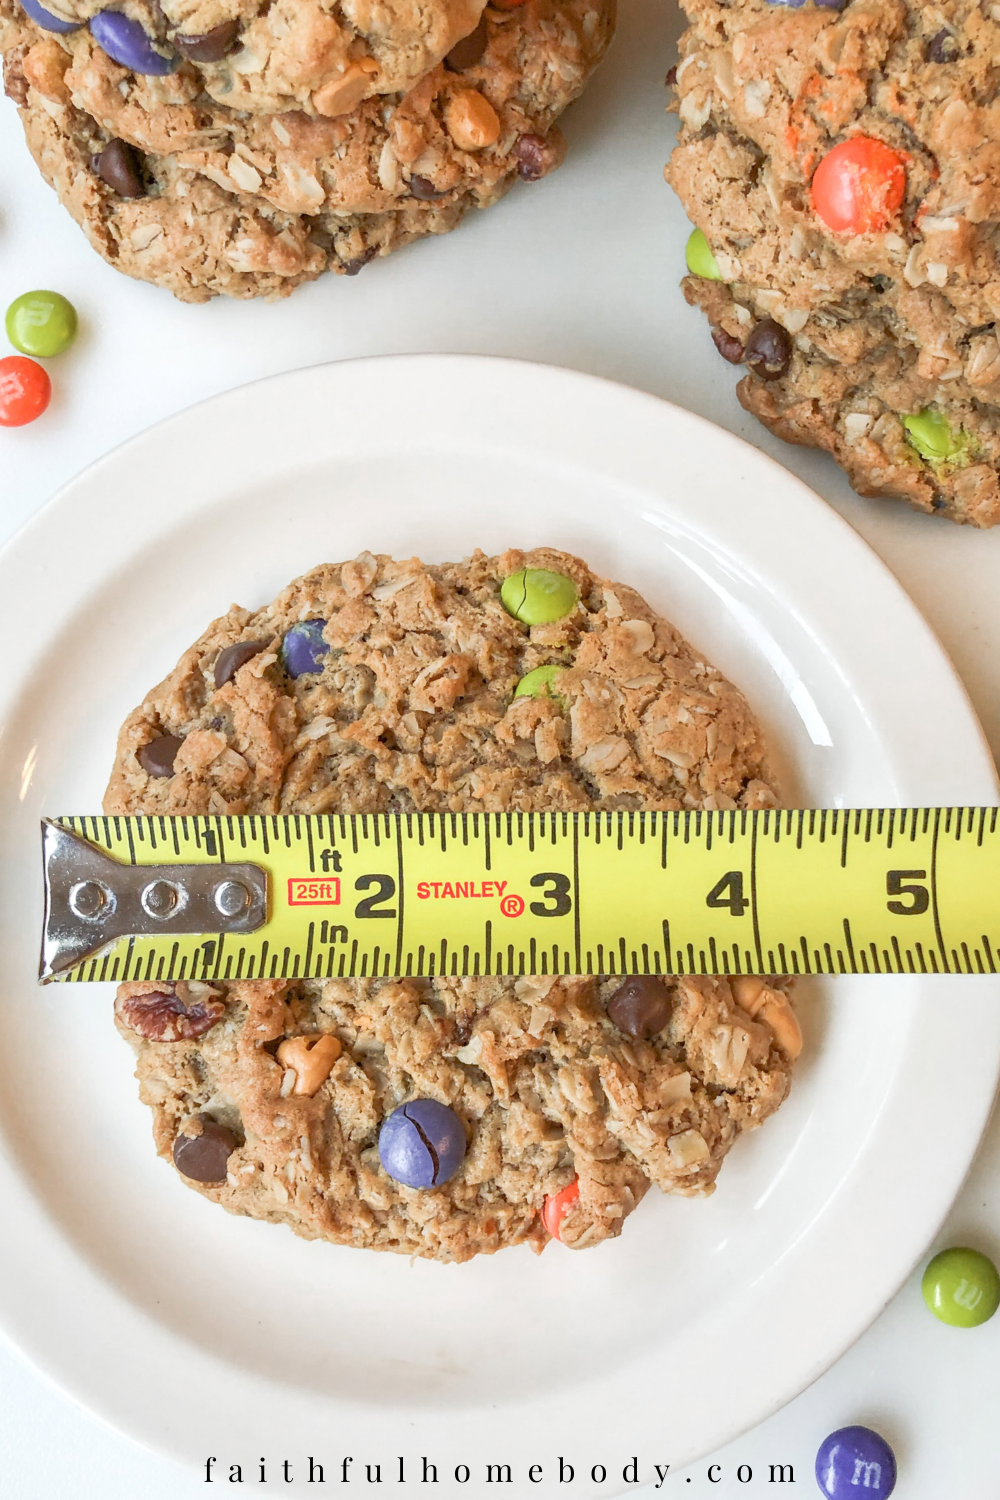 A big cookie is placed on a white plate.  A measuring tape spans across the cookie, measuring 4 inches.  Cookies are in the background, surrounding the plate.